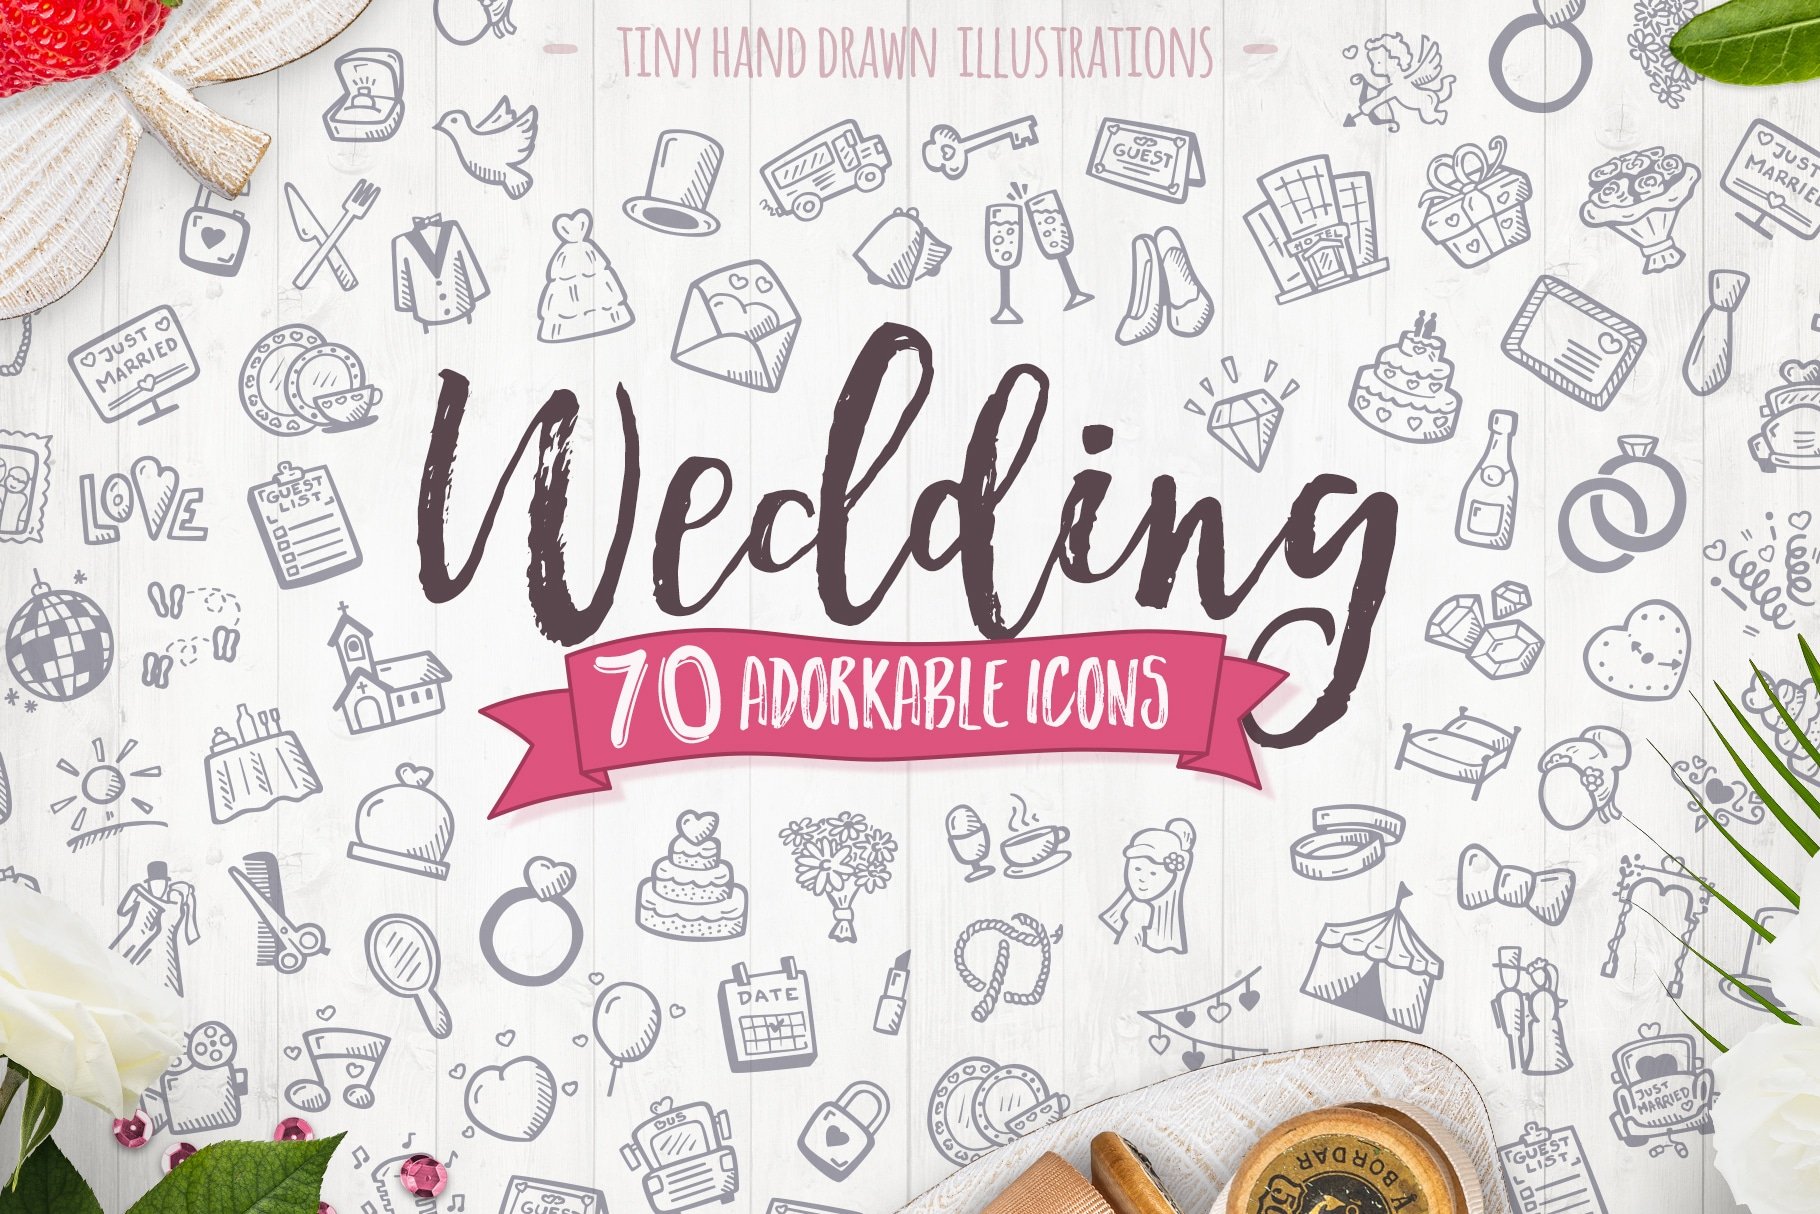 Wedding - Hand Drawn Icons cover image.